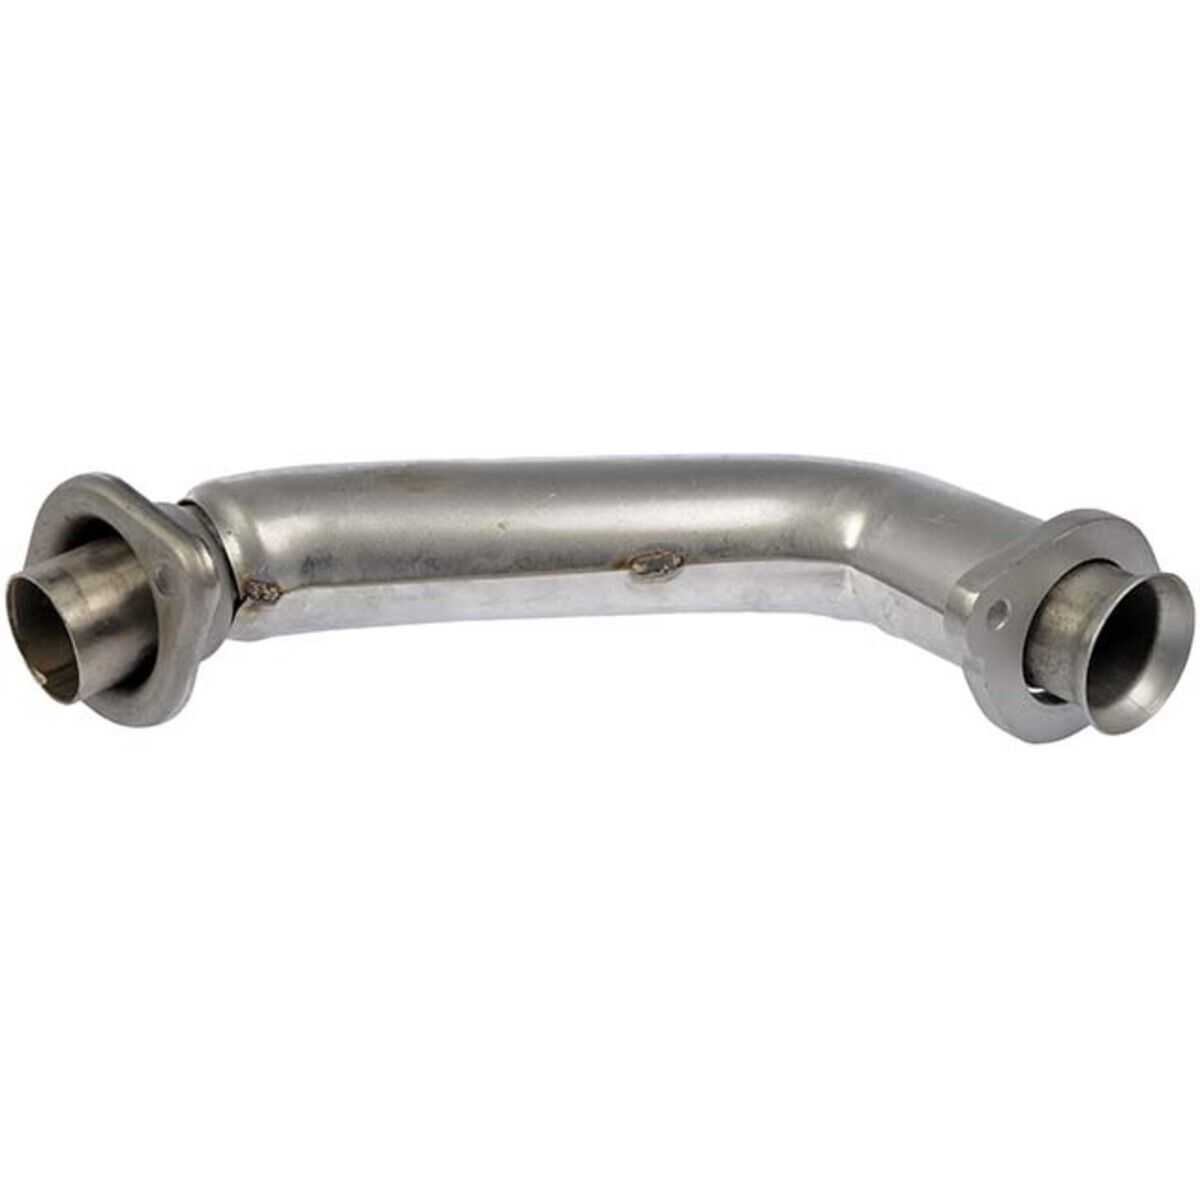 679-003 Dorman Down Pipe for Chevy Olds Le Sabre NINETY EIGHT Chevrolet Impala